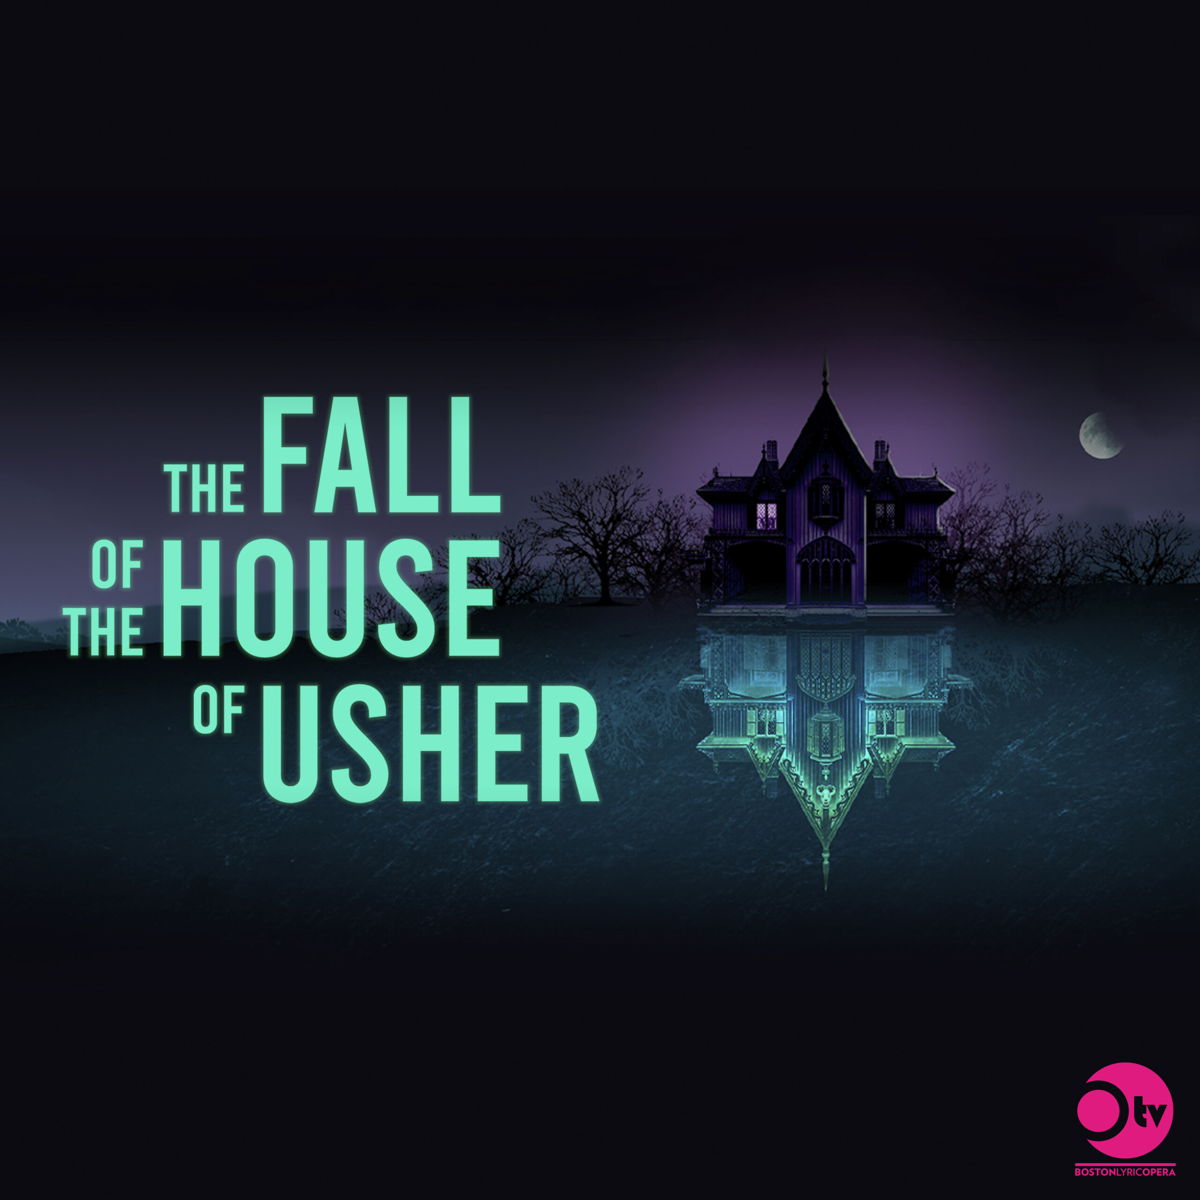 the Fall of the House of Usher' Details, Poe References, and